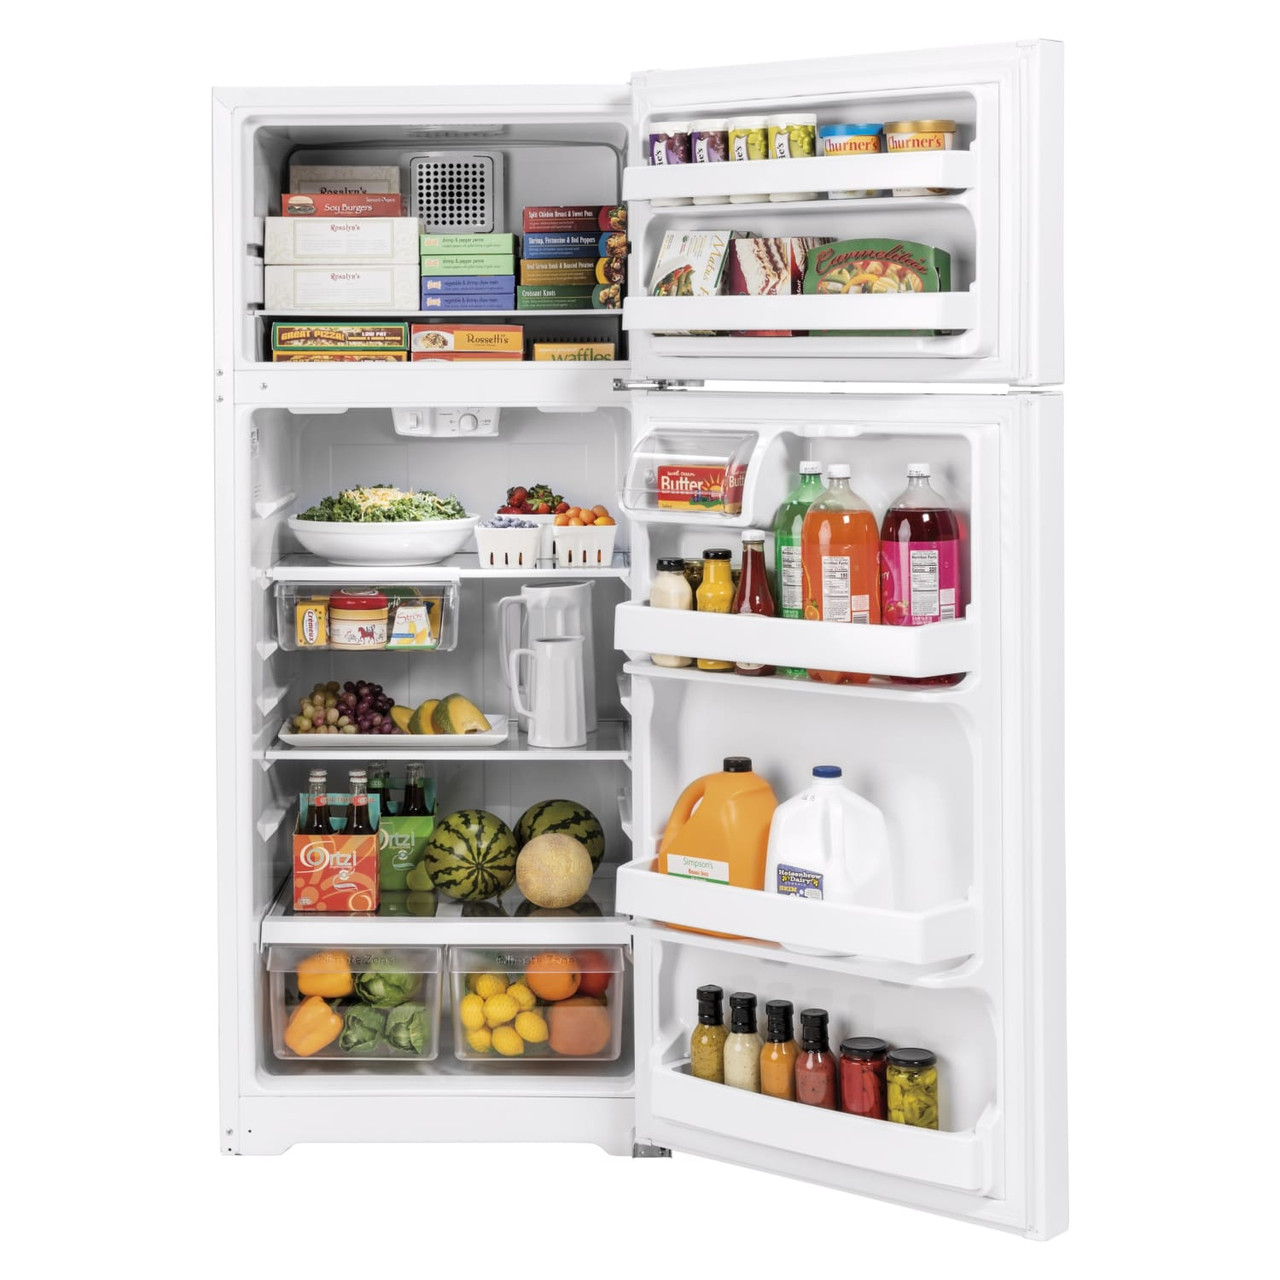 GE 17.5 Cu. Ft. Top-Freezer Refrigerator with LED Lighting and Edge-to-Edge Glass Shelves - GTS18HGNRWW